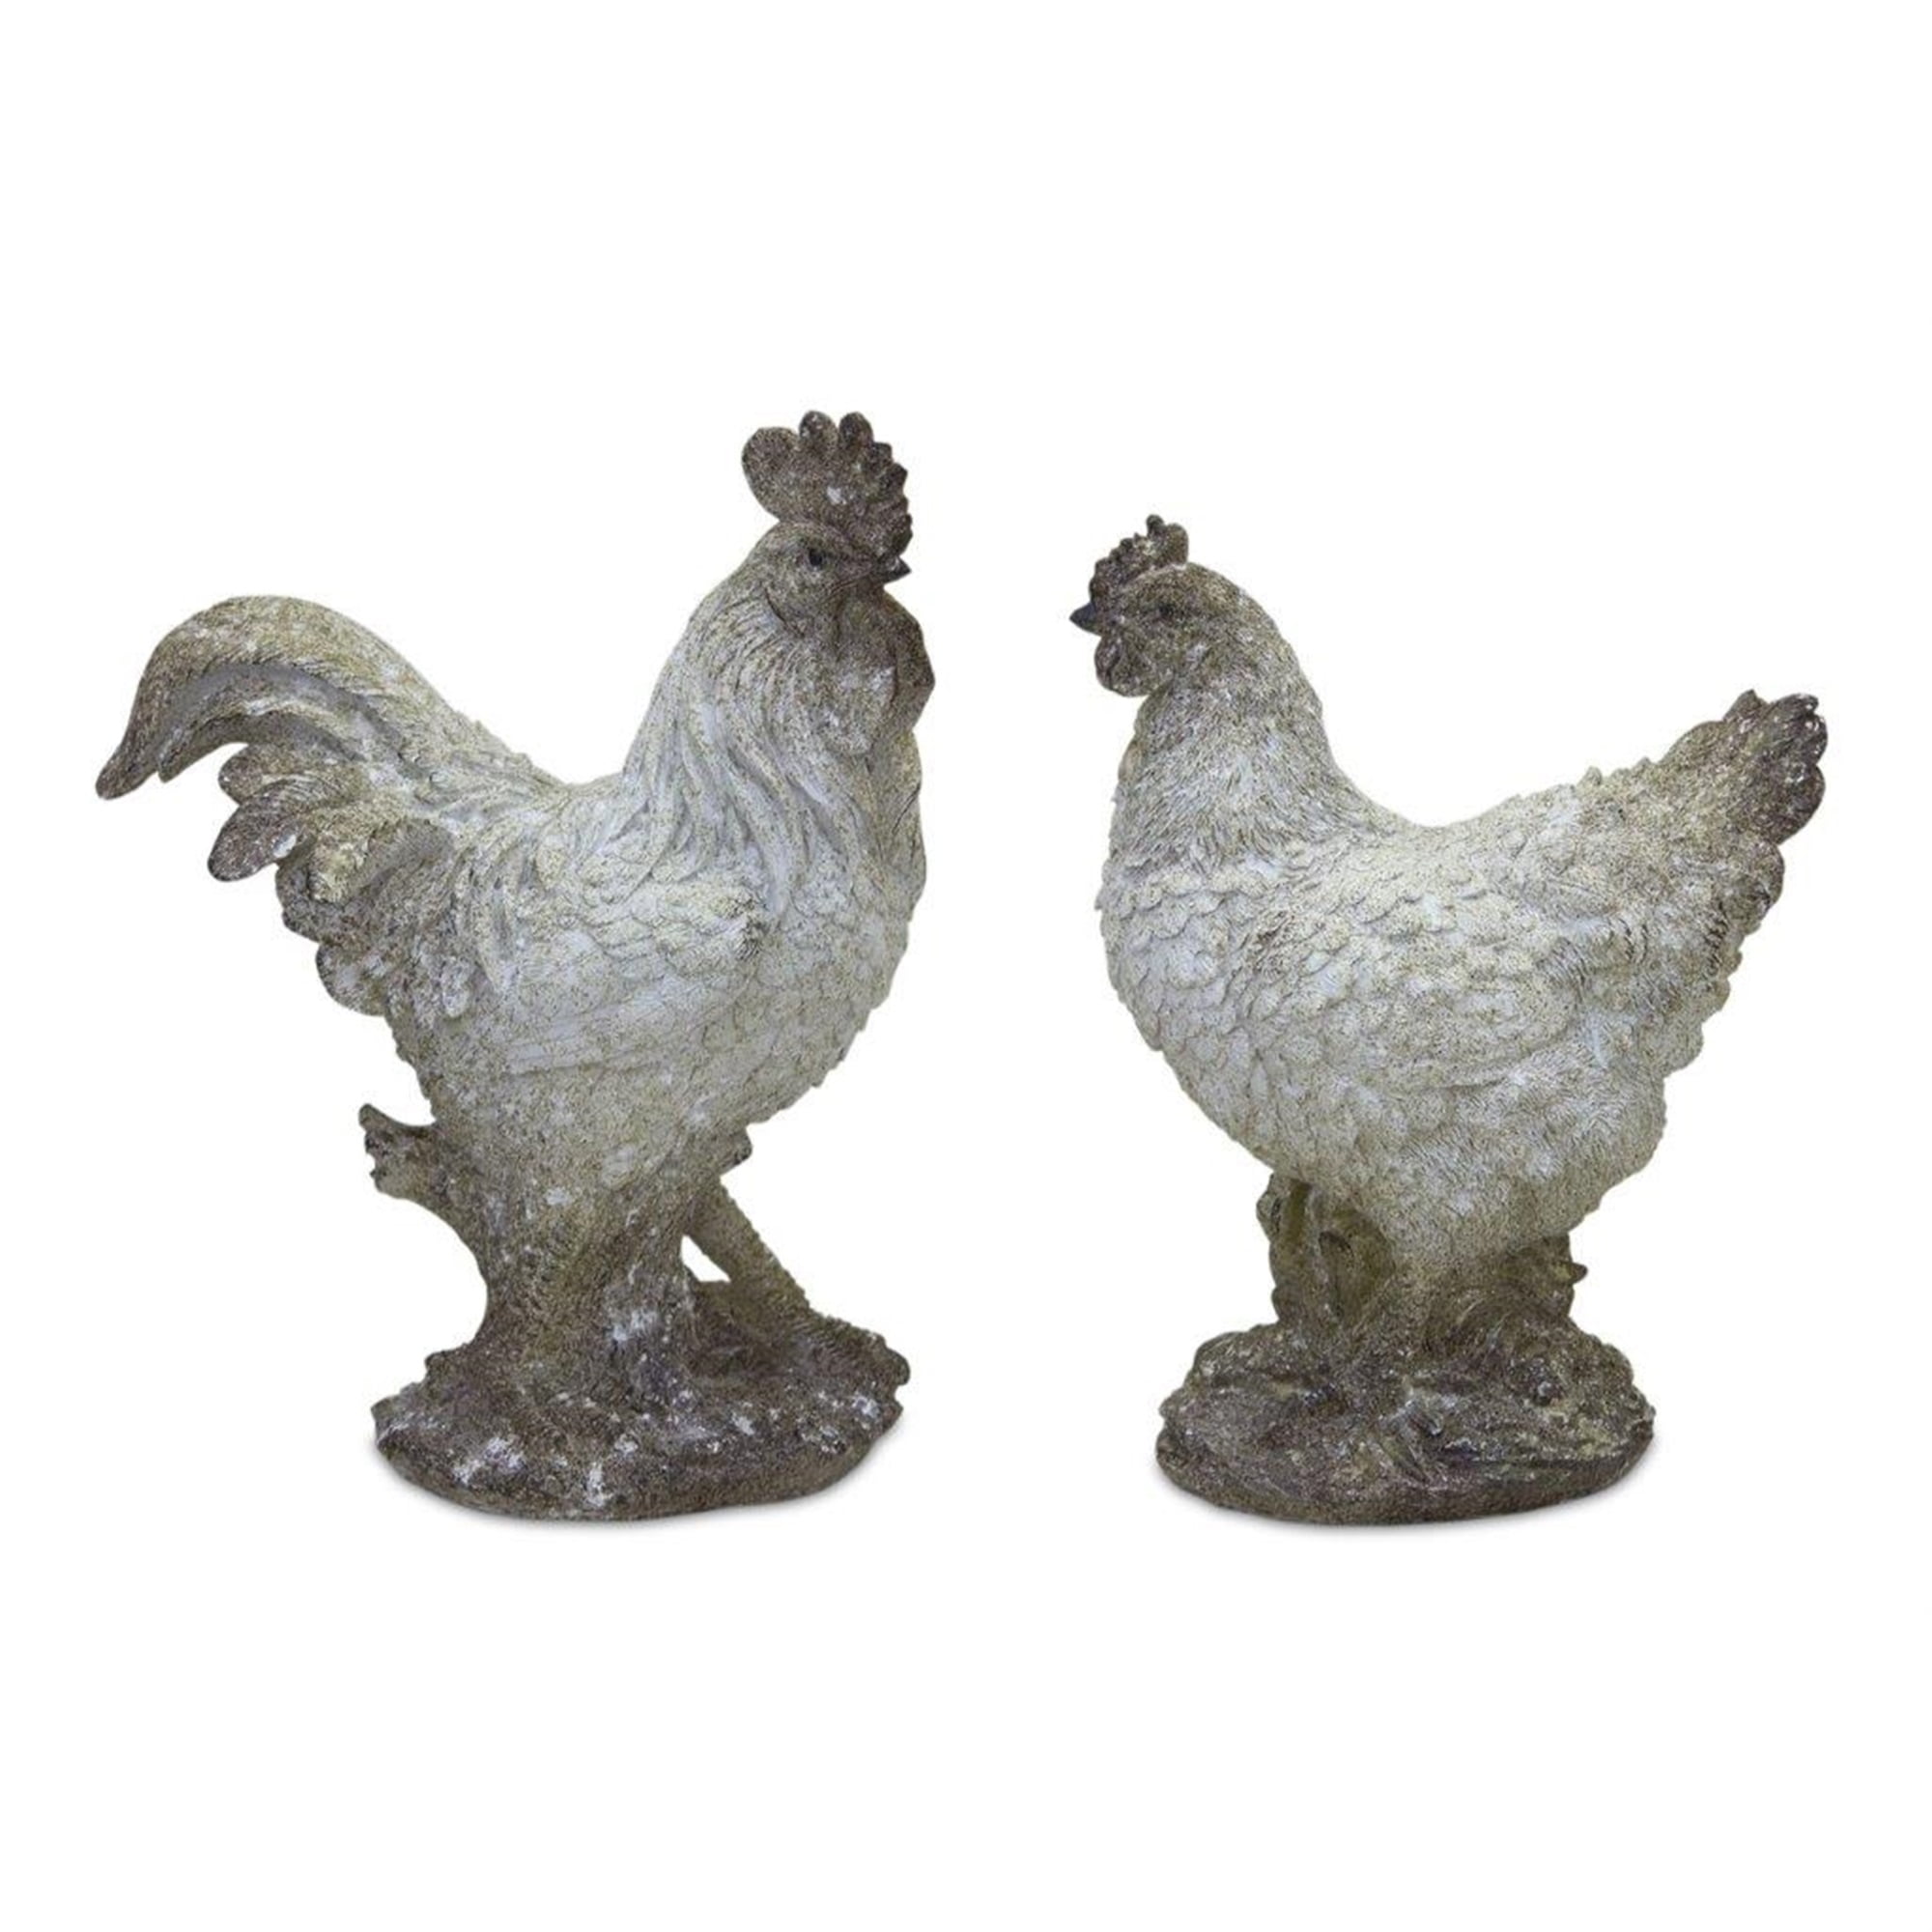 Chicken and Rooster (Set of 2) 9.5"H, 10.75"H Resin